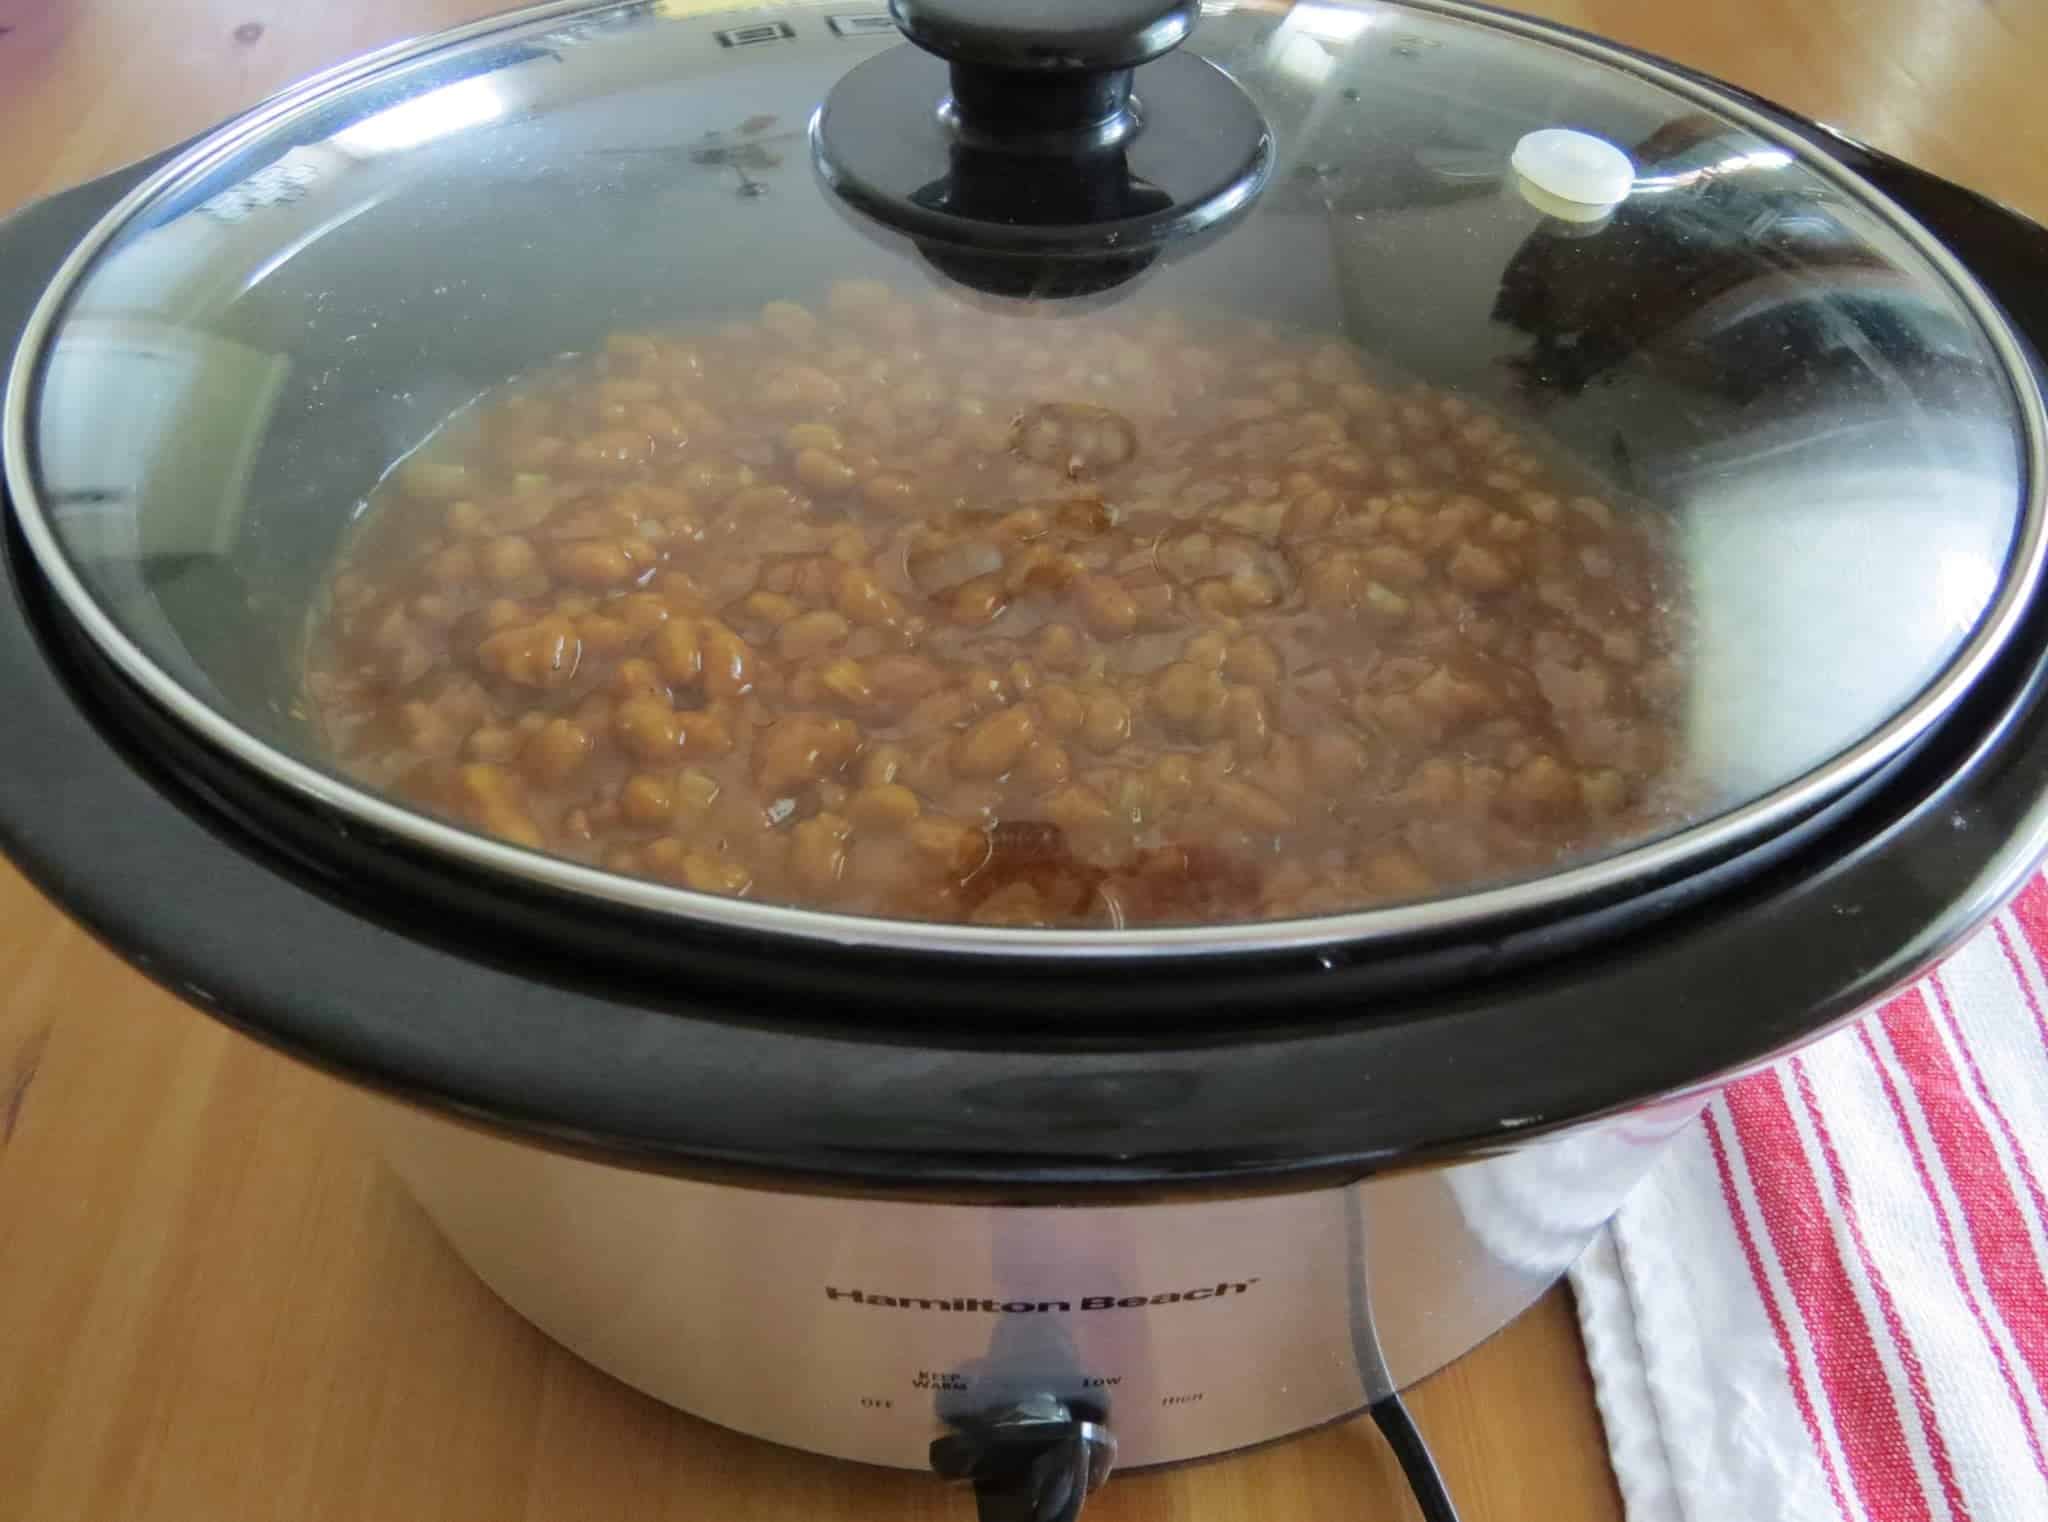 an oval Hamilton Beach slow cooker shown with a lid on top.